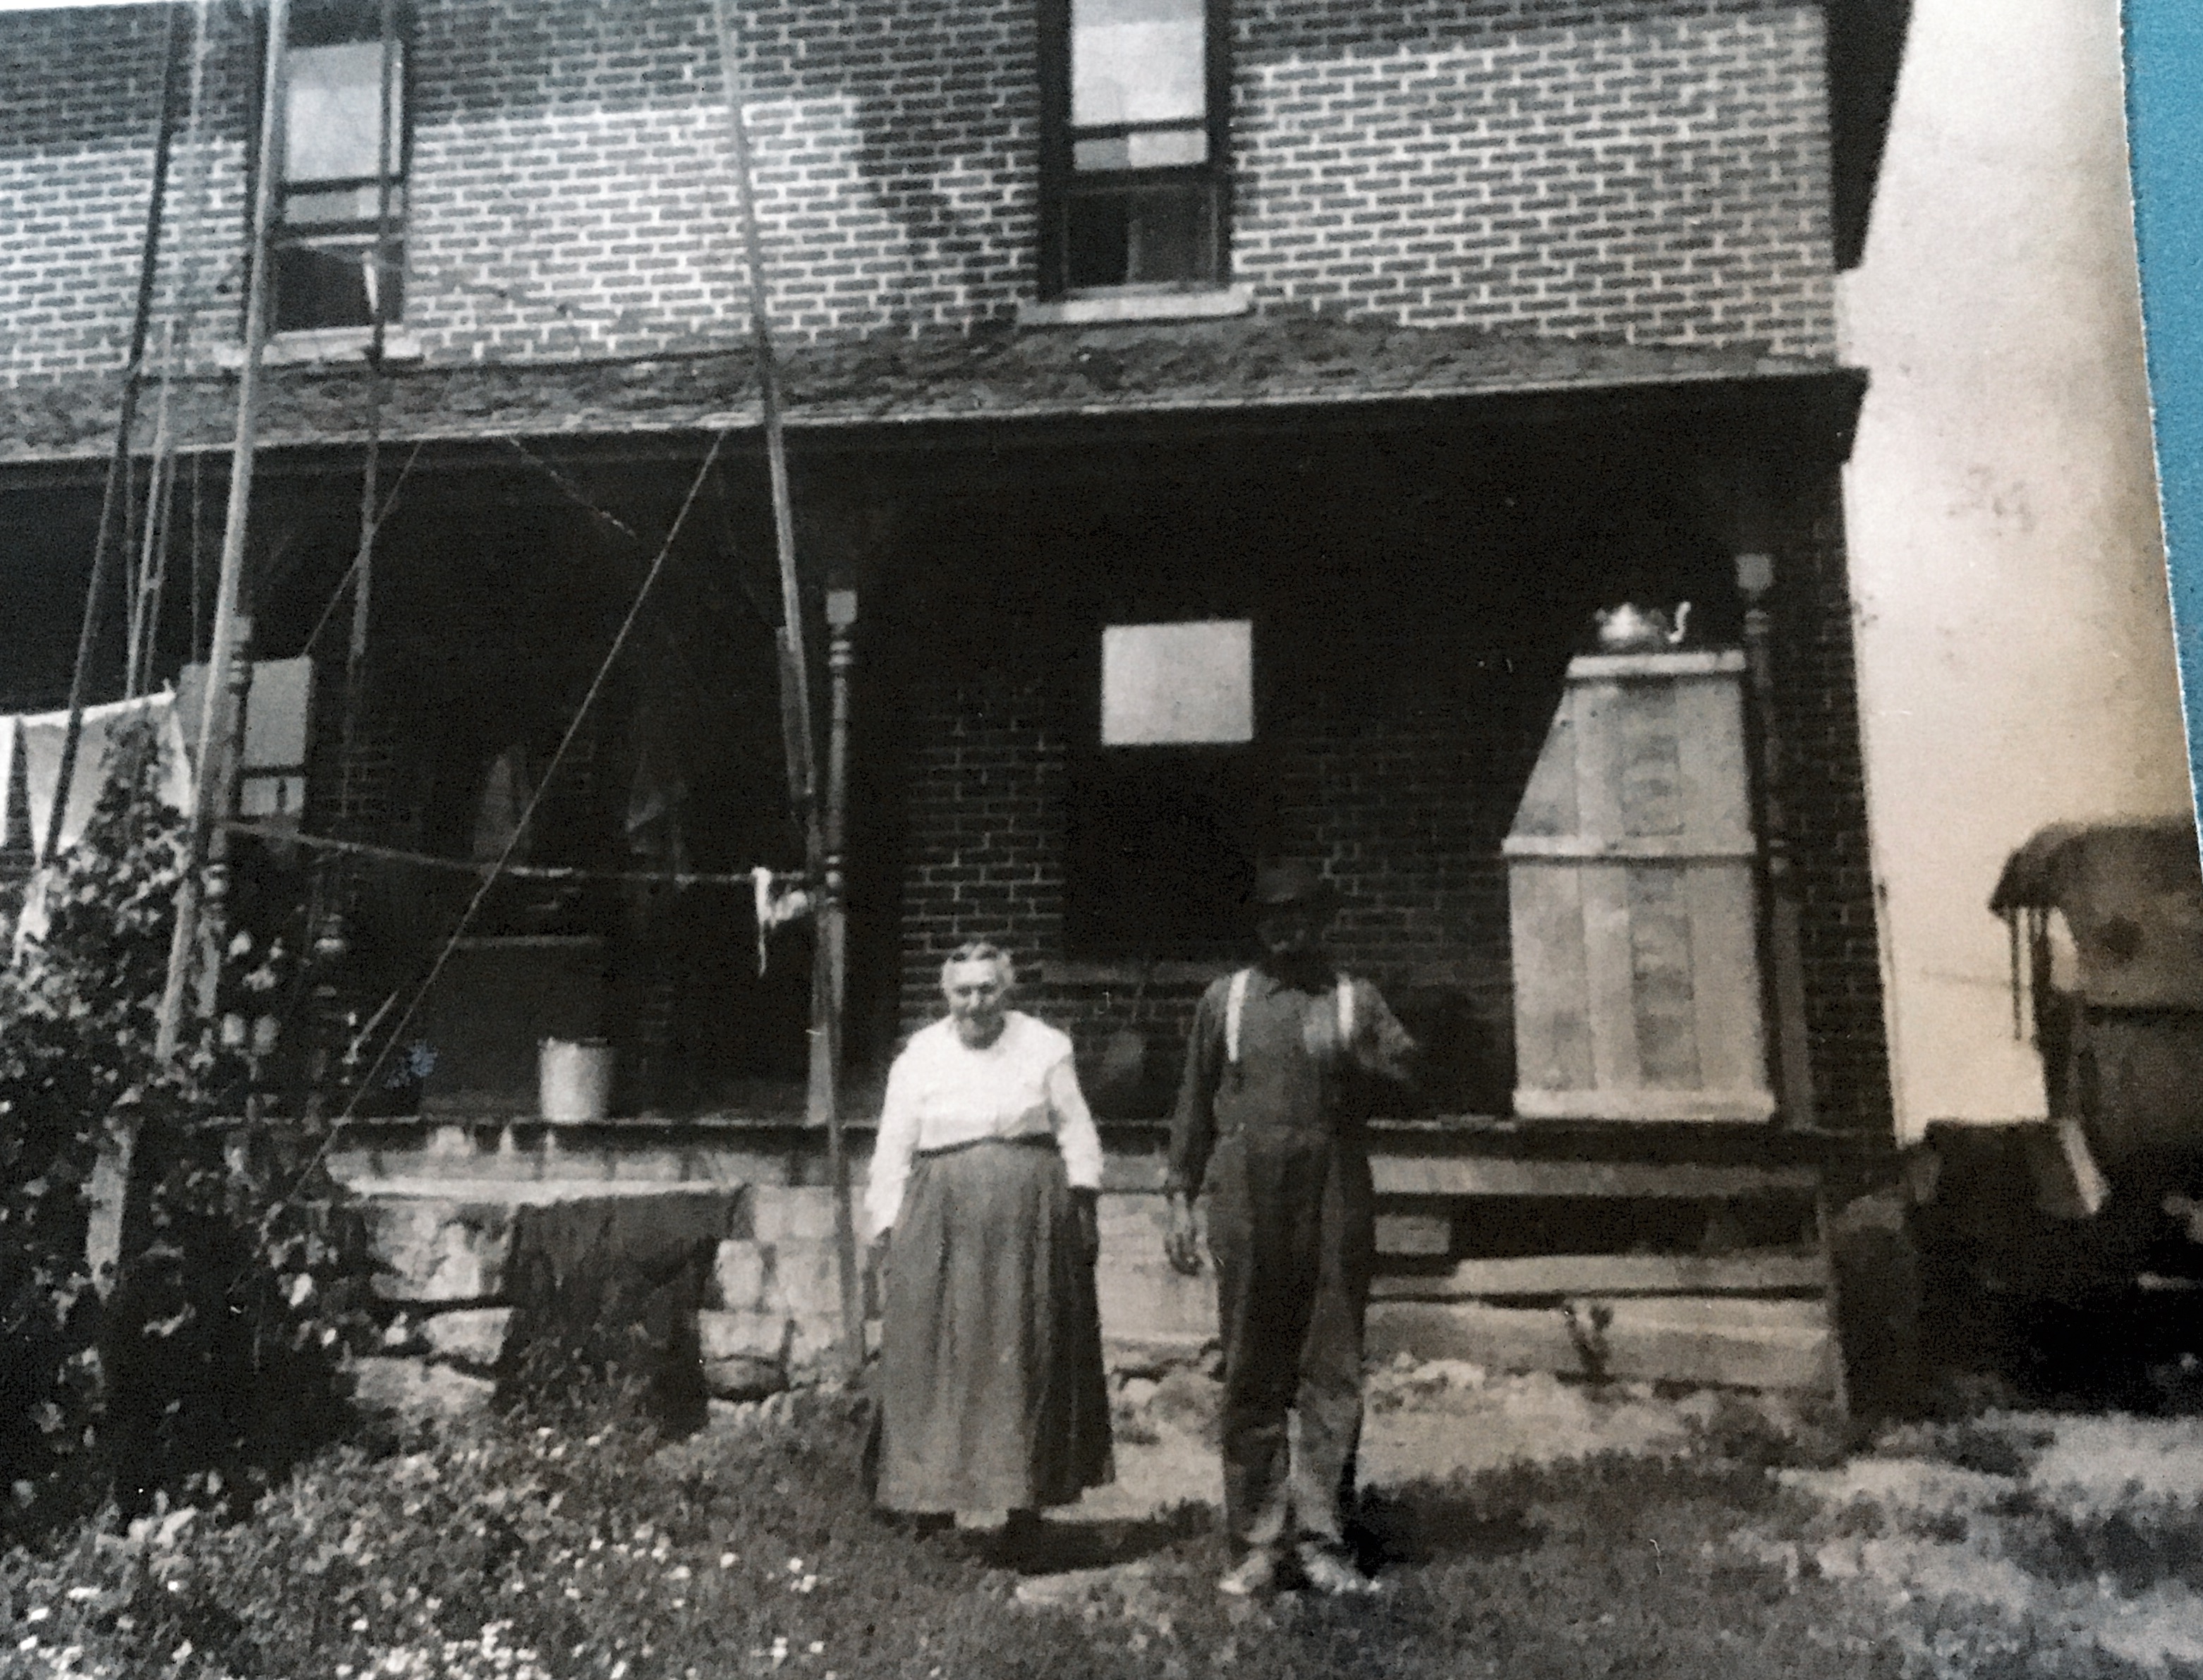 Joe and Susanna Weisenberger Susa in front of Home built in early 1900’s. Married 4/6/1986